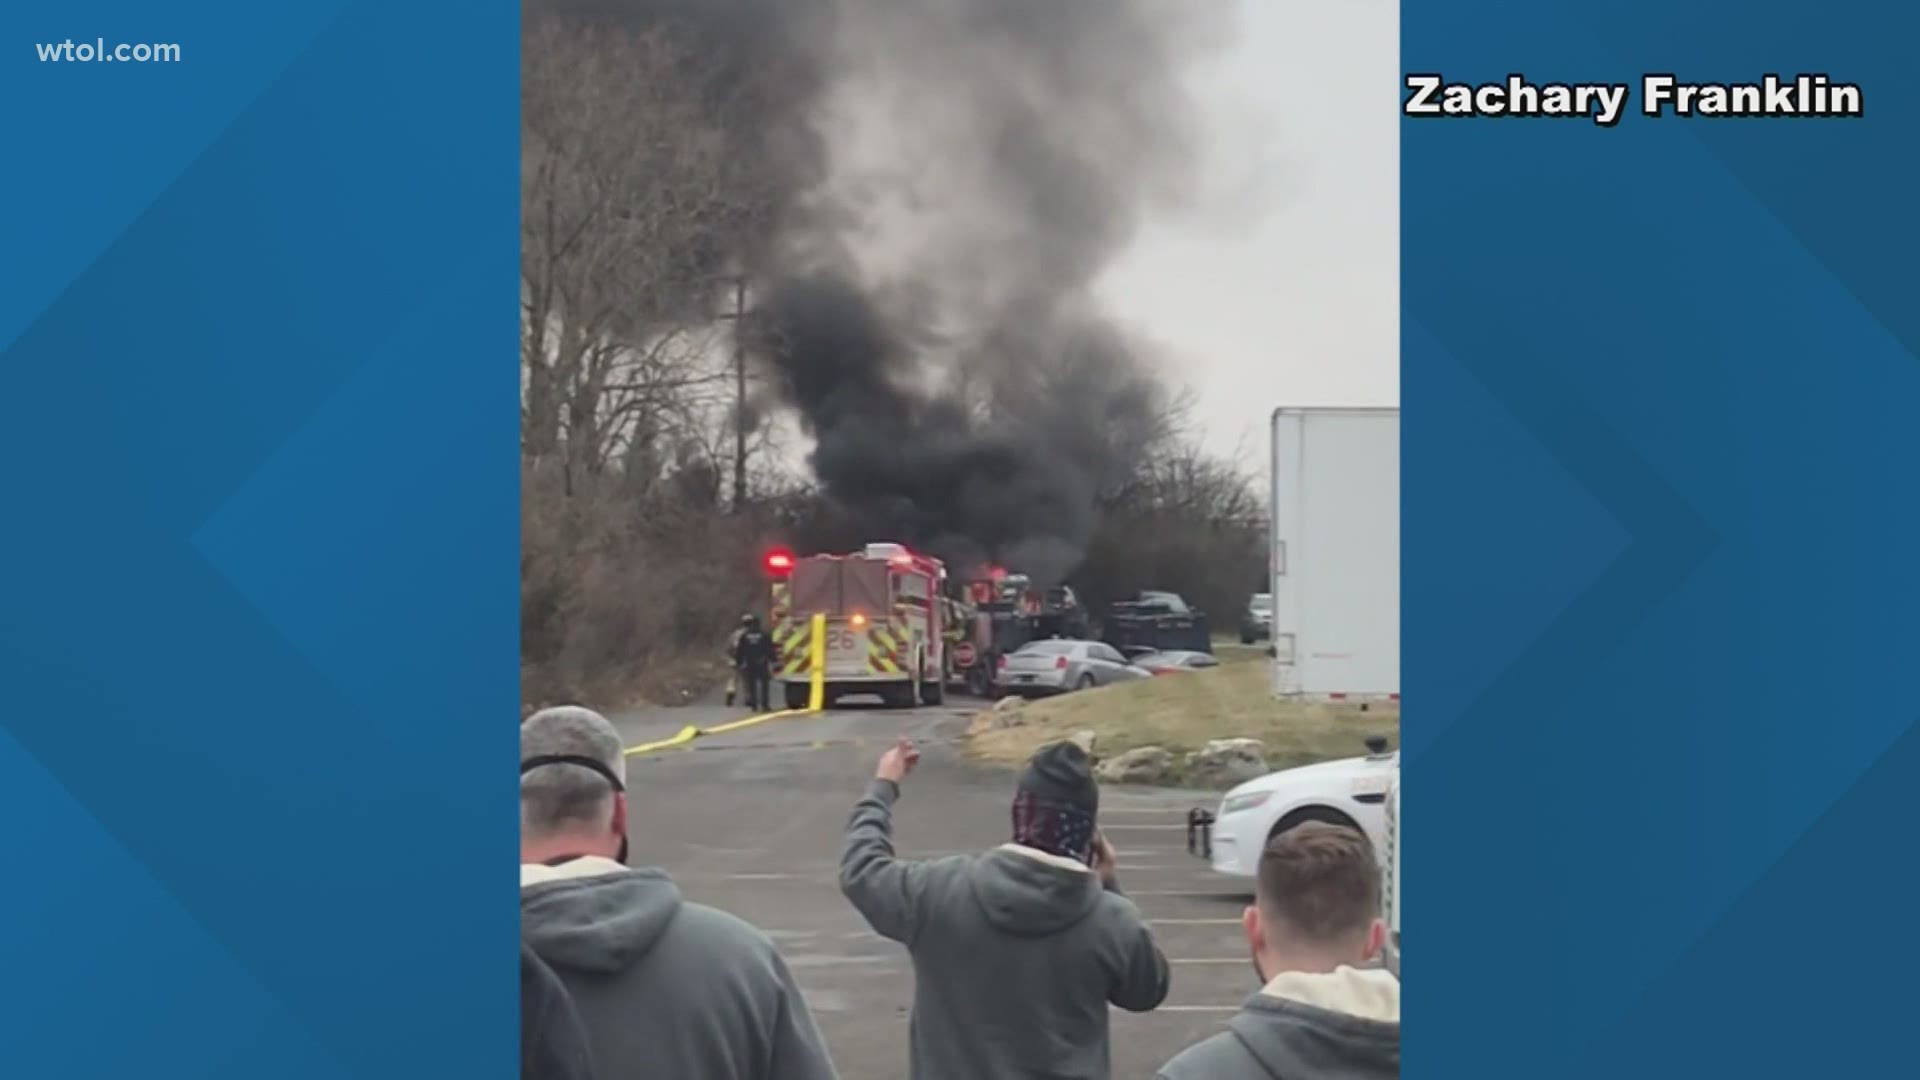 When Columbus police reached the pickup, 30 to 50 rounds of ammunition inside it started to explode and the truck became engulfed in flames.